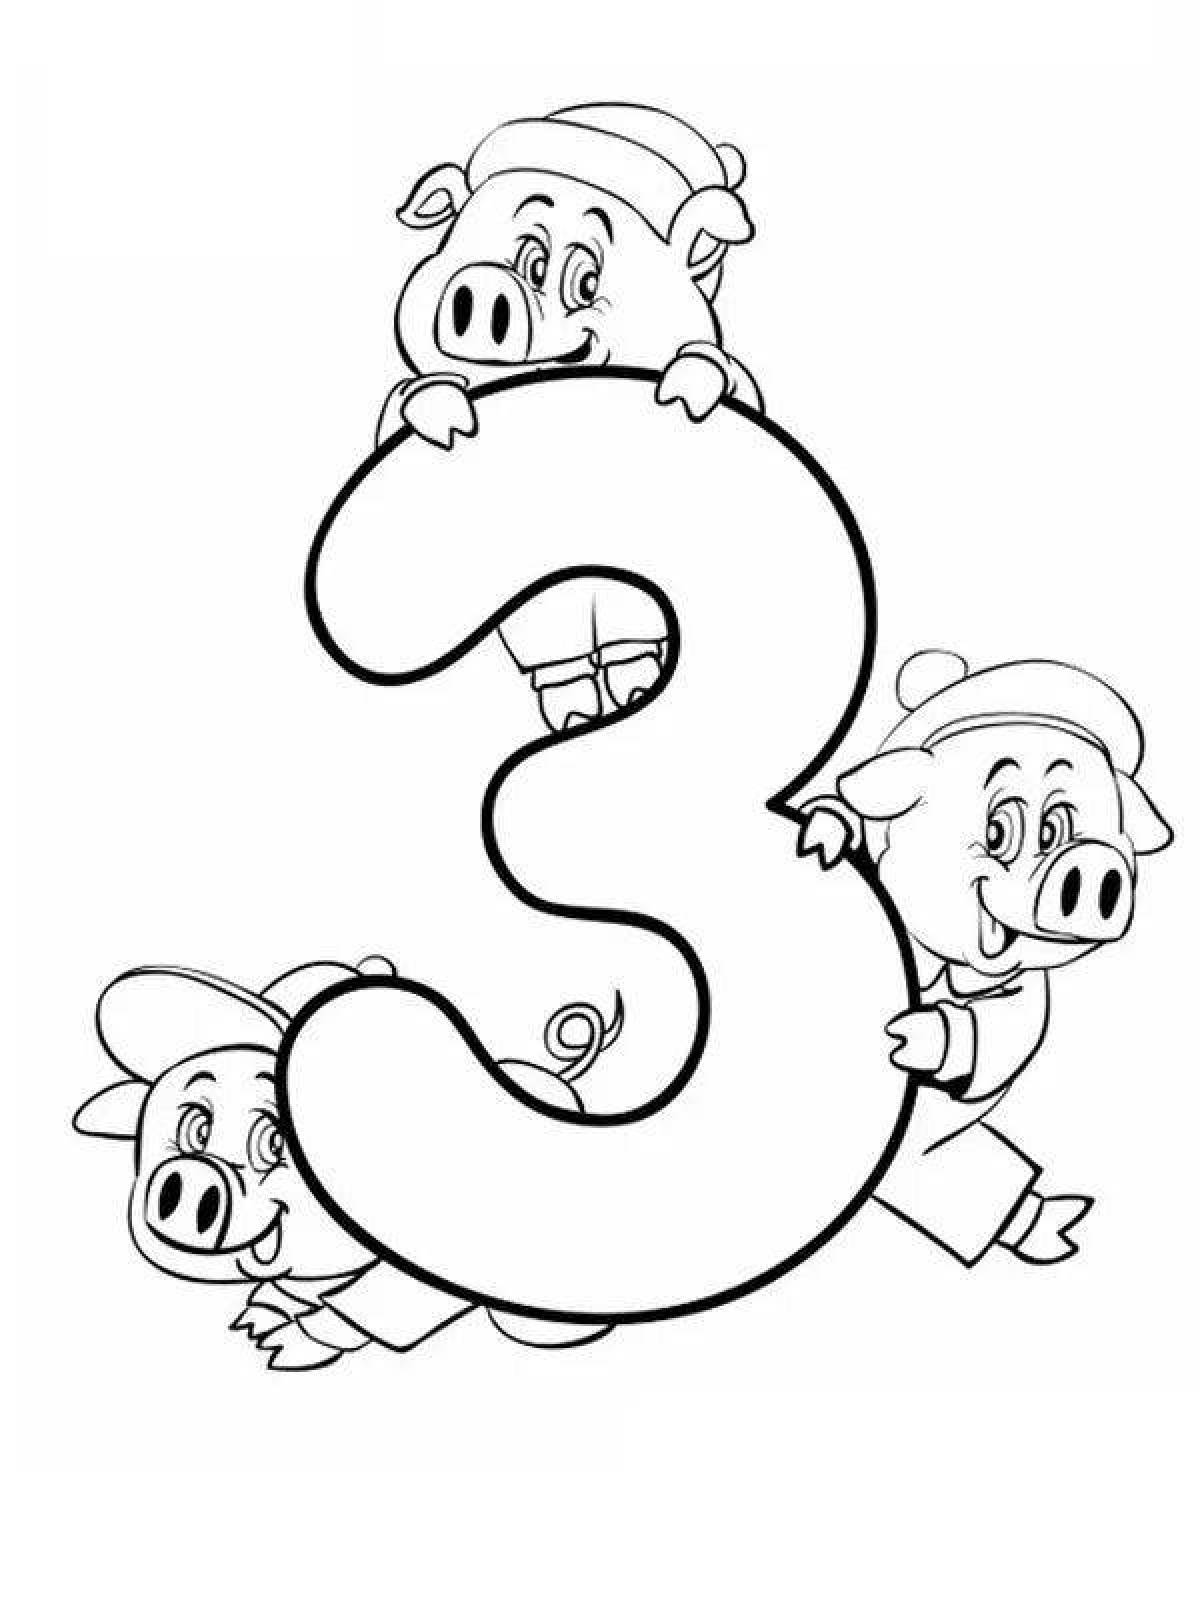 Coloring book with bright funny numbers